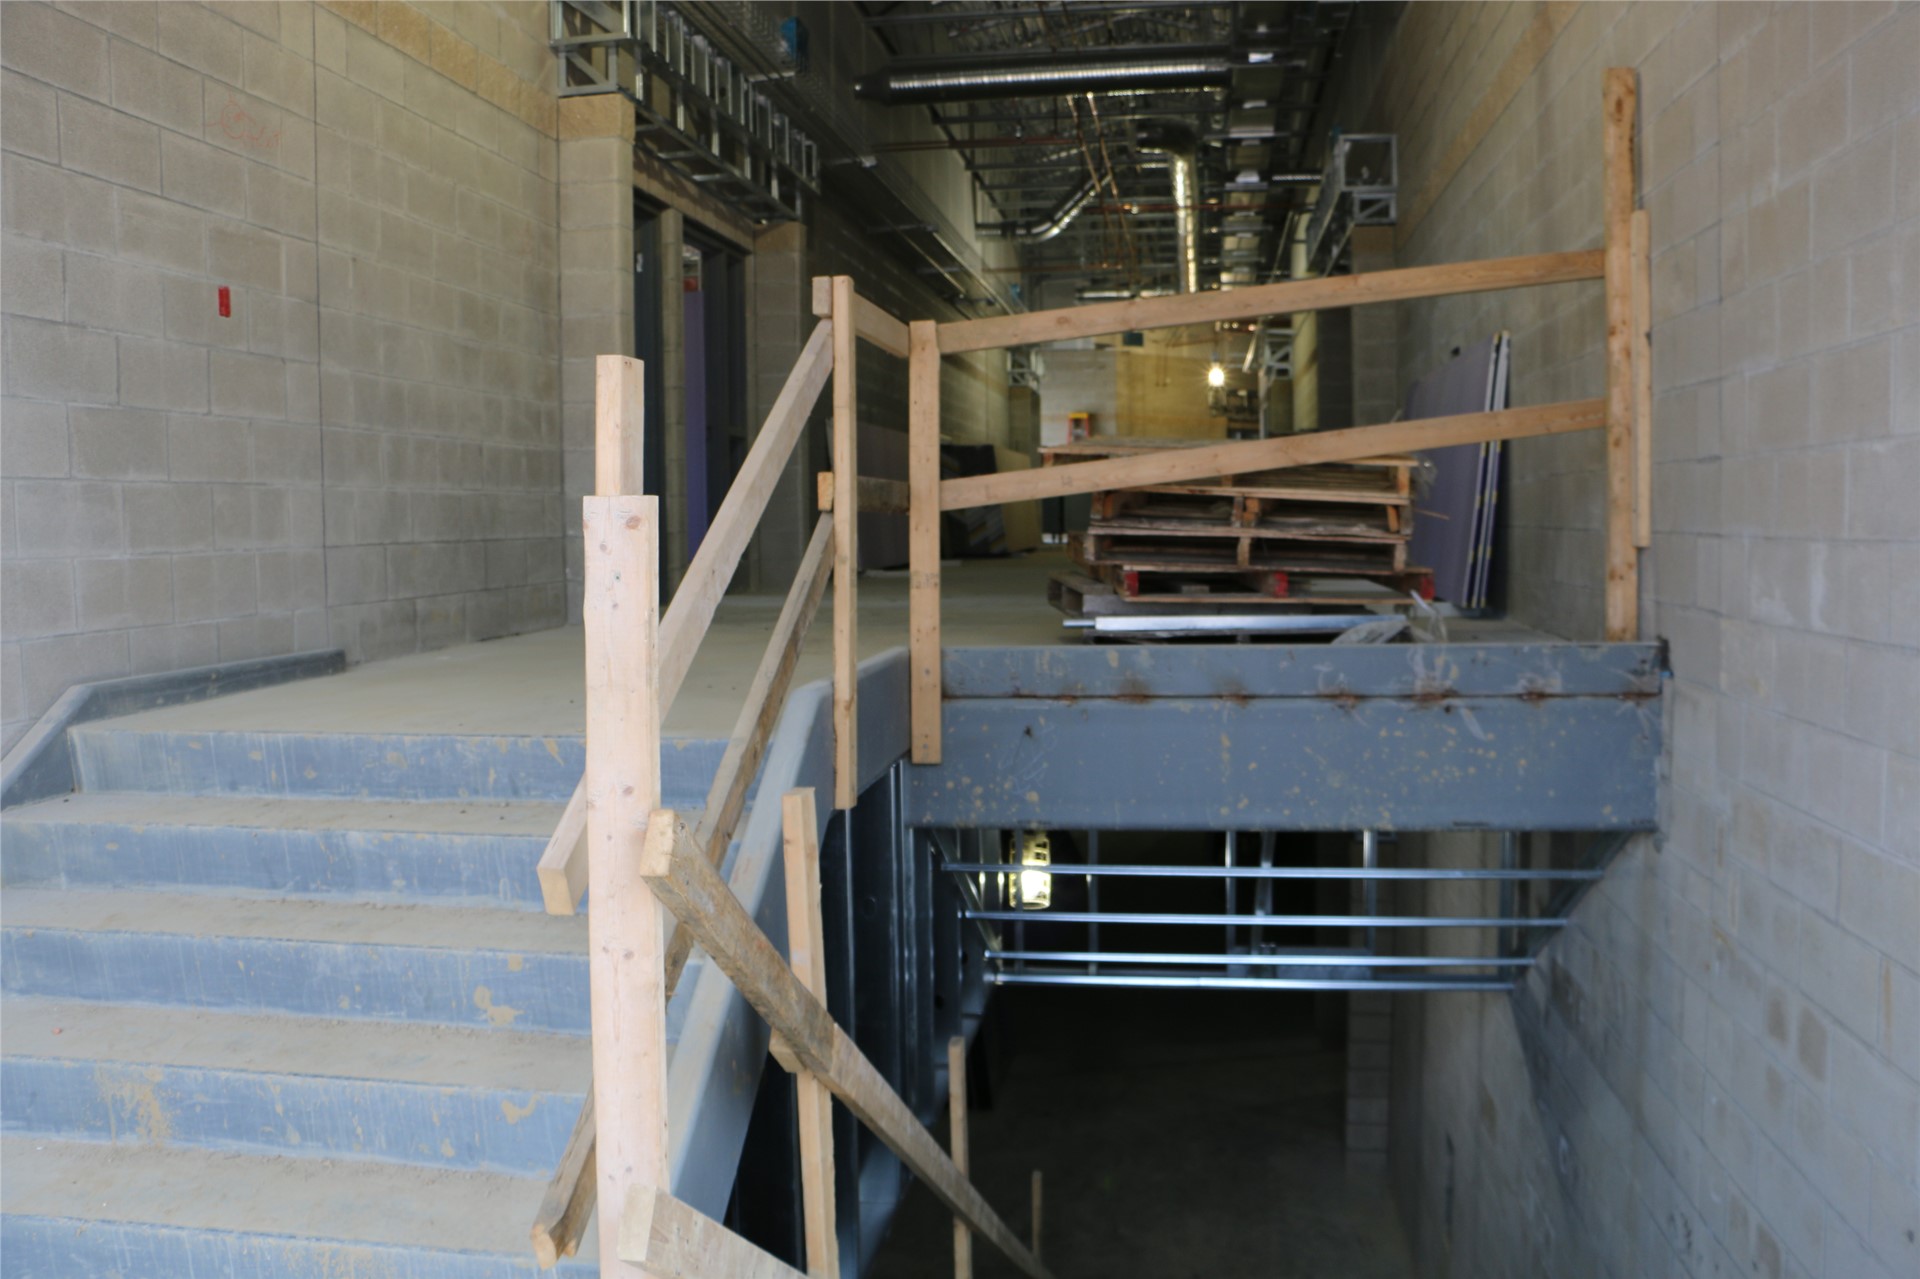 Stairwell connecting social studies (second floor) and language arts (first floor)